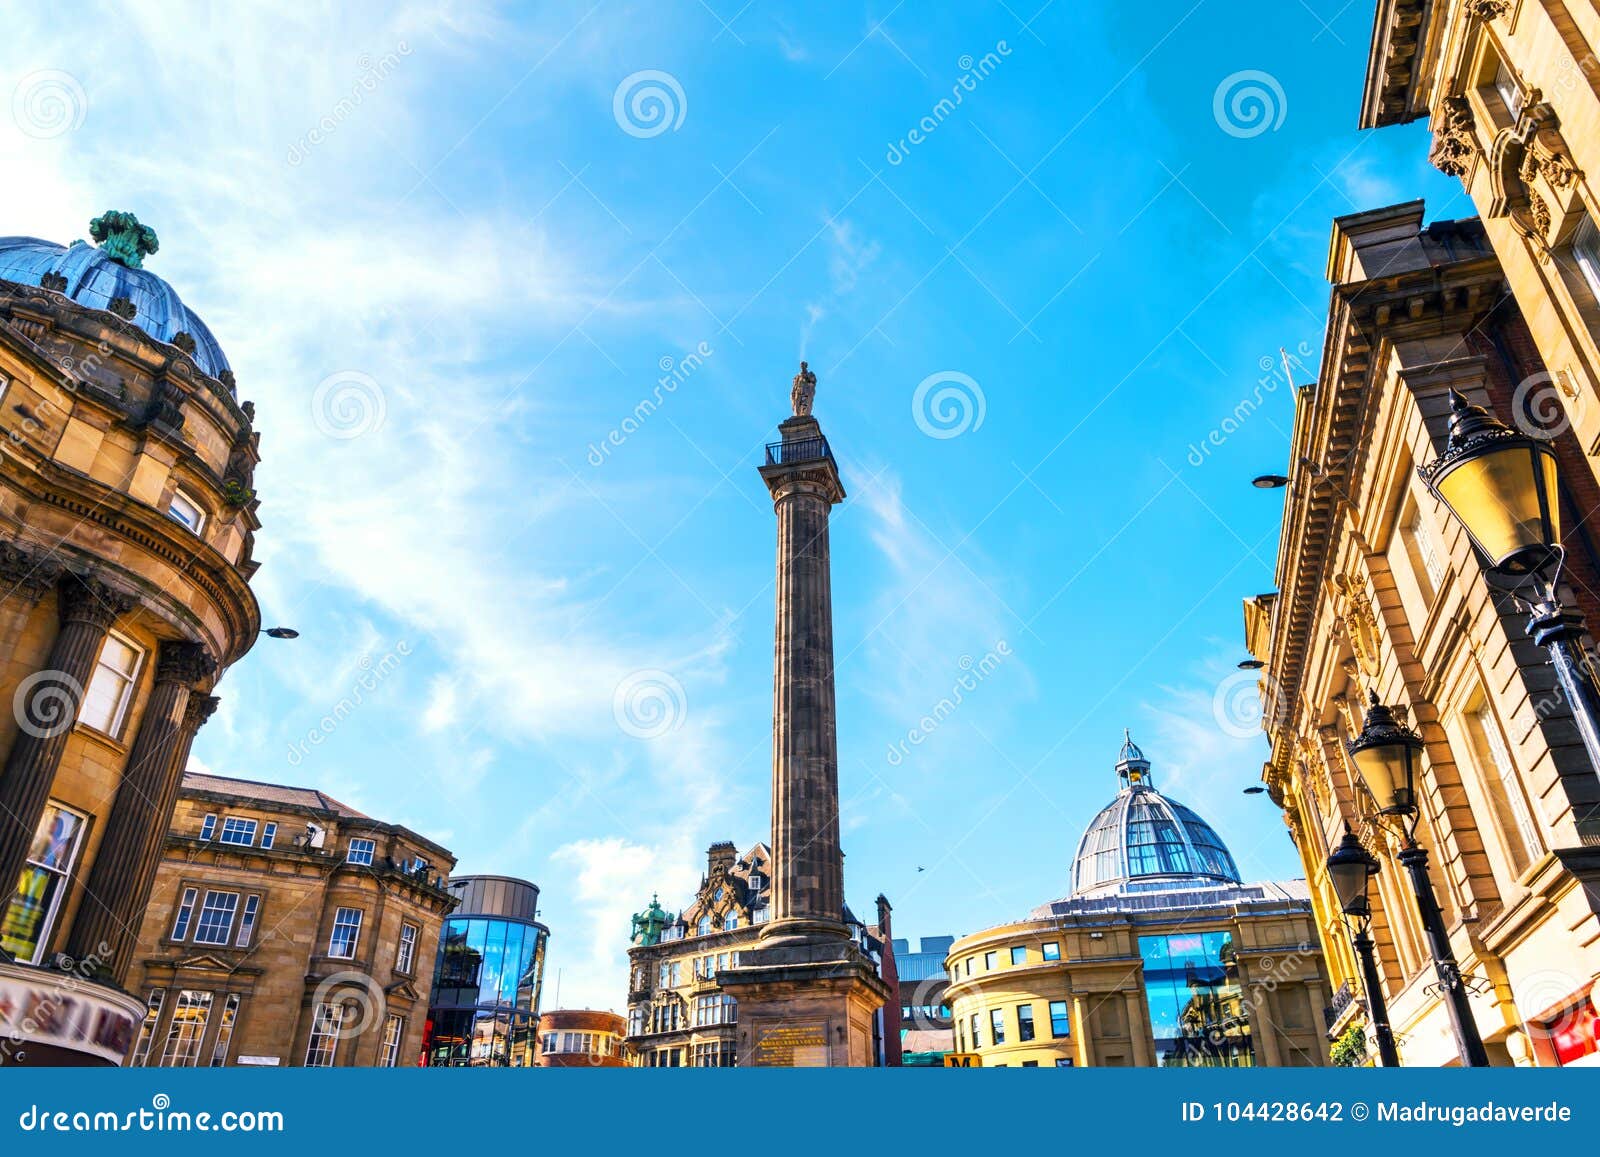 charles grey monument in newcastle upon tyne, uk during the day